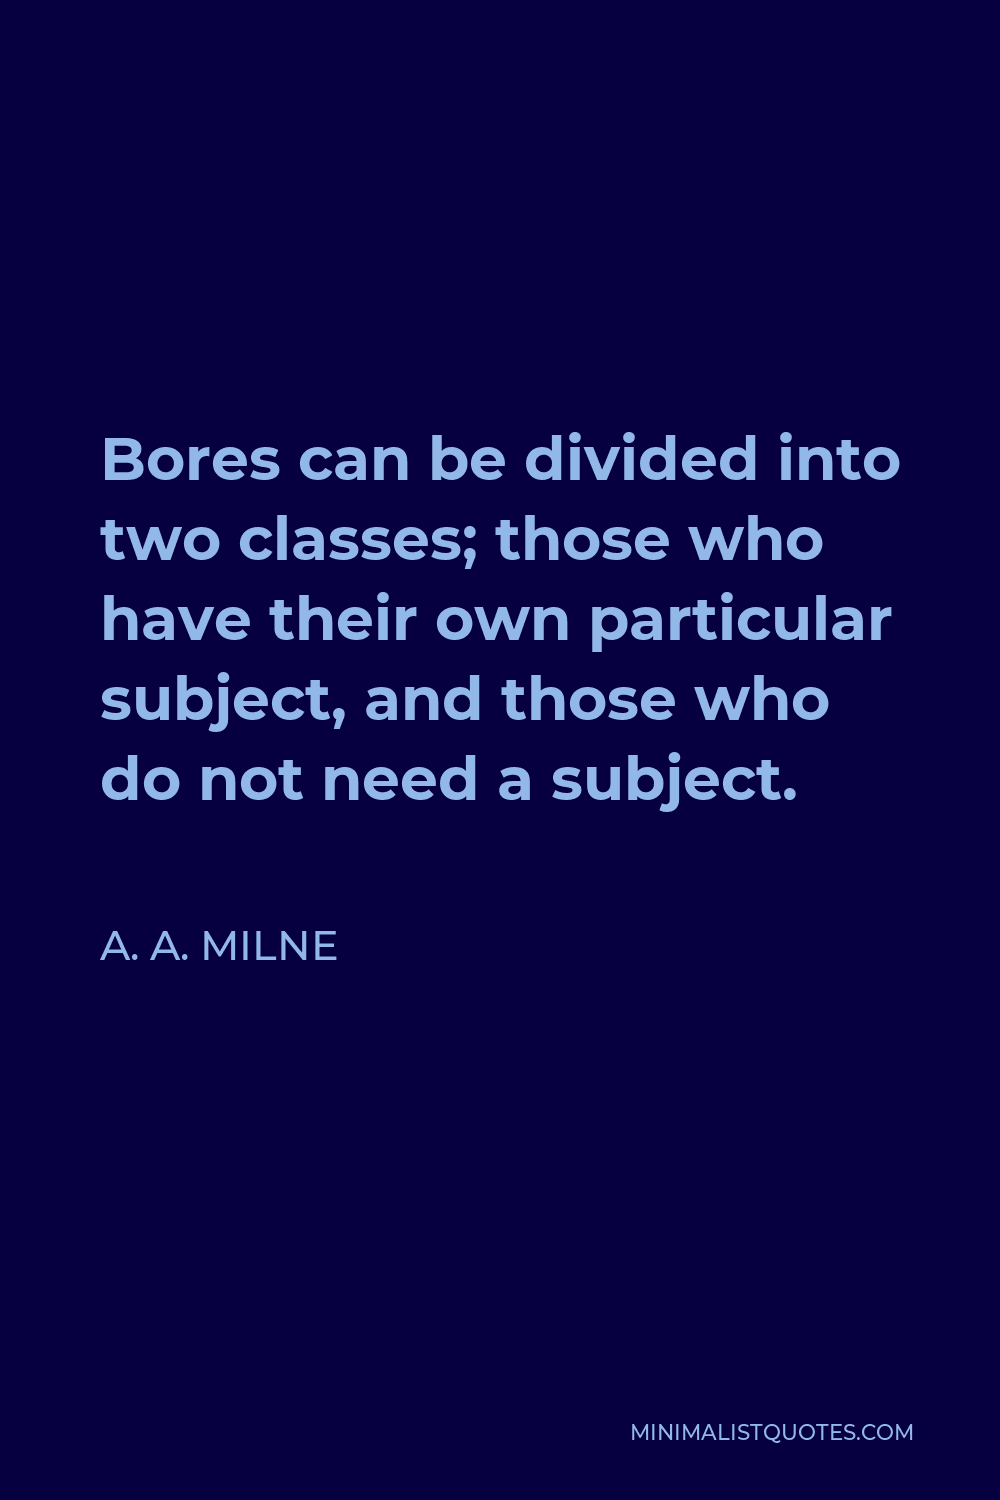 A. A. Milne Quote - Bores can be divided into two classes; those who have their own particular subject, and those who do not need a subject.